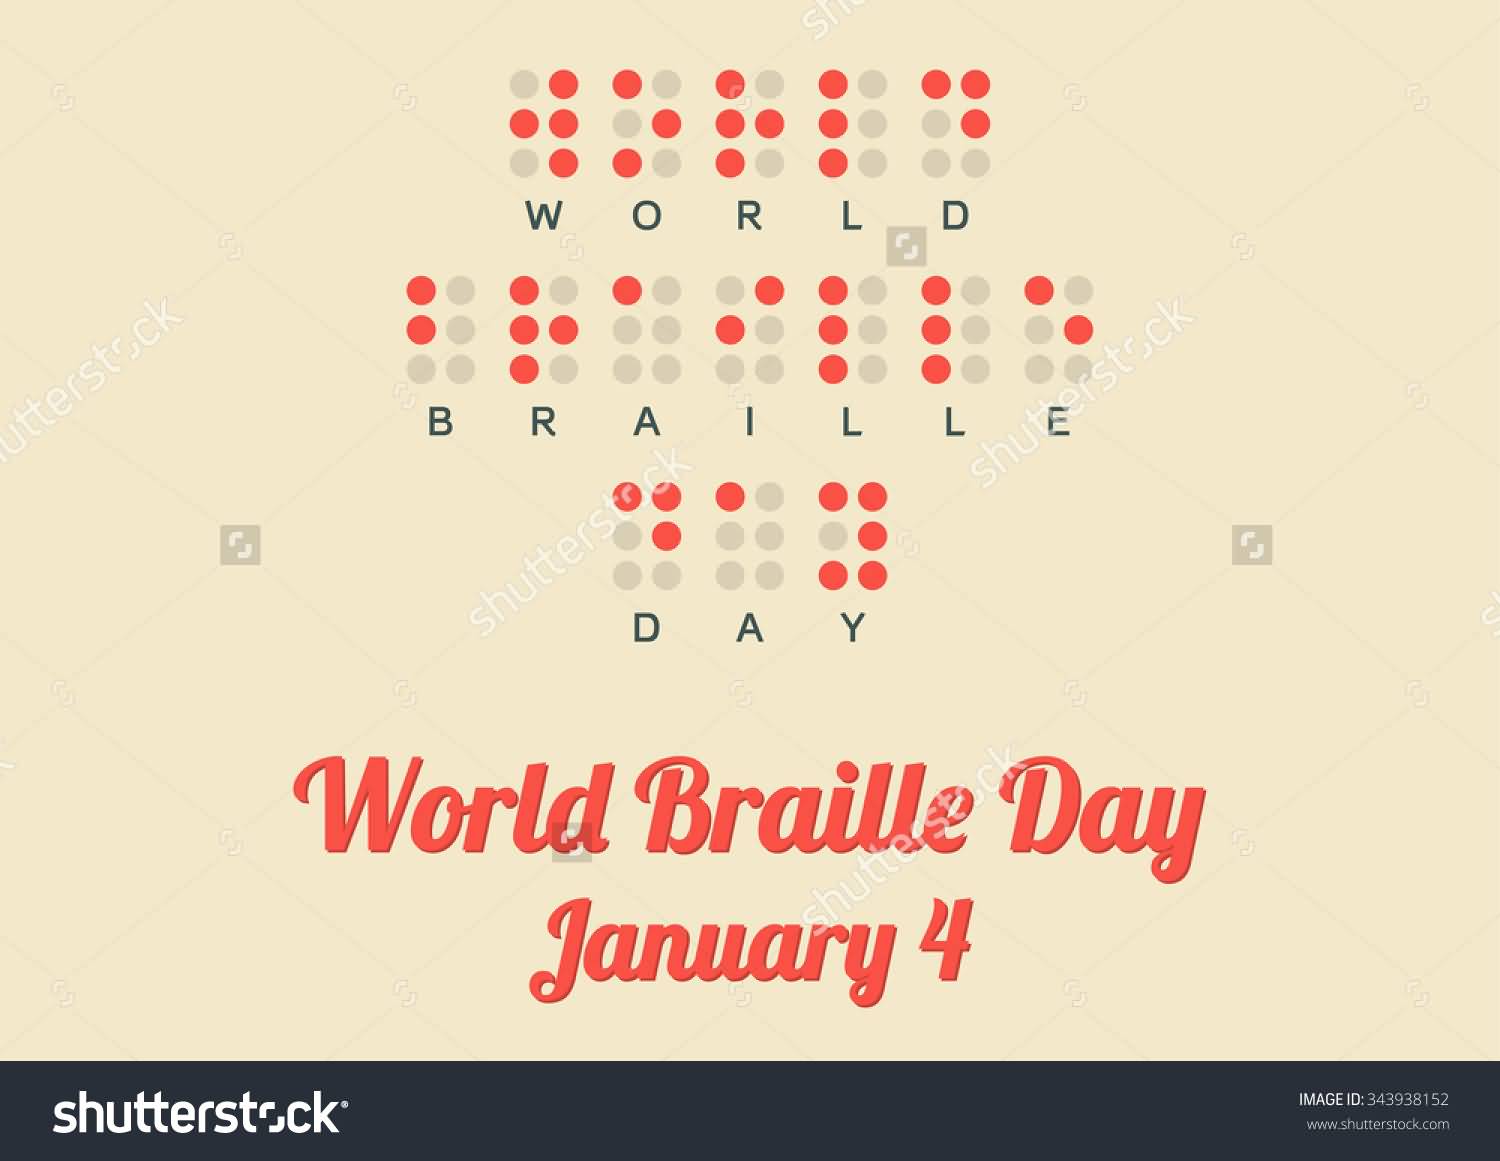 World Braille Day January 4 Poster